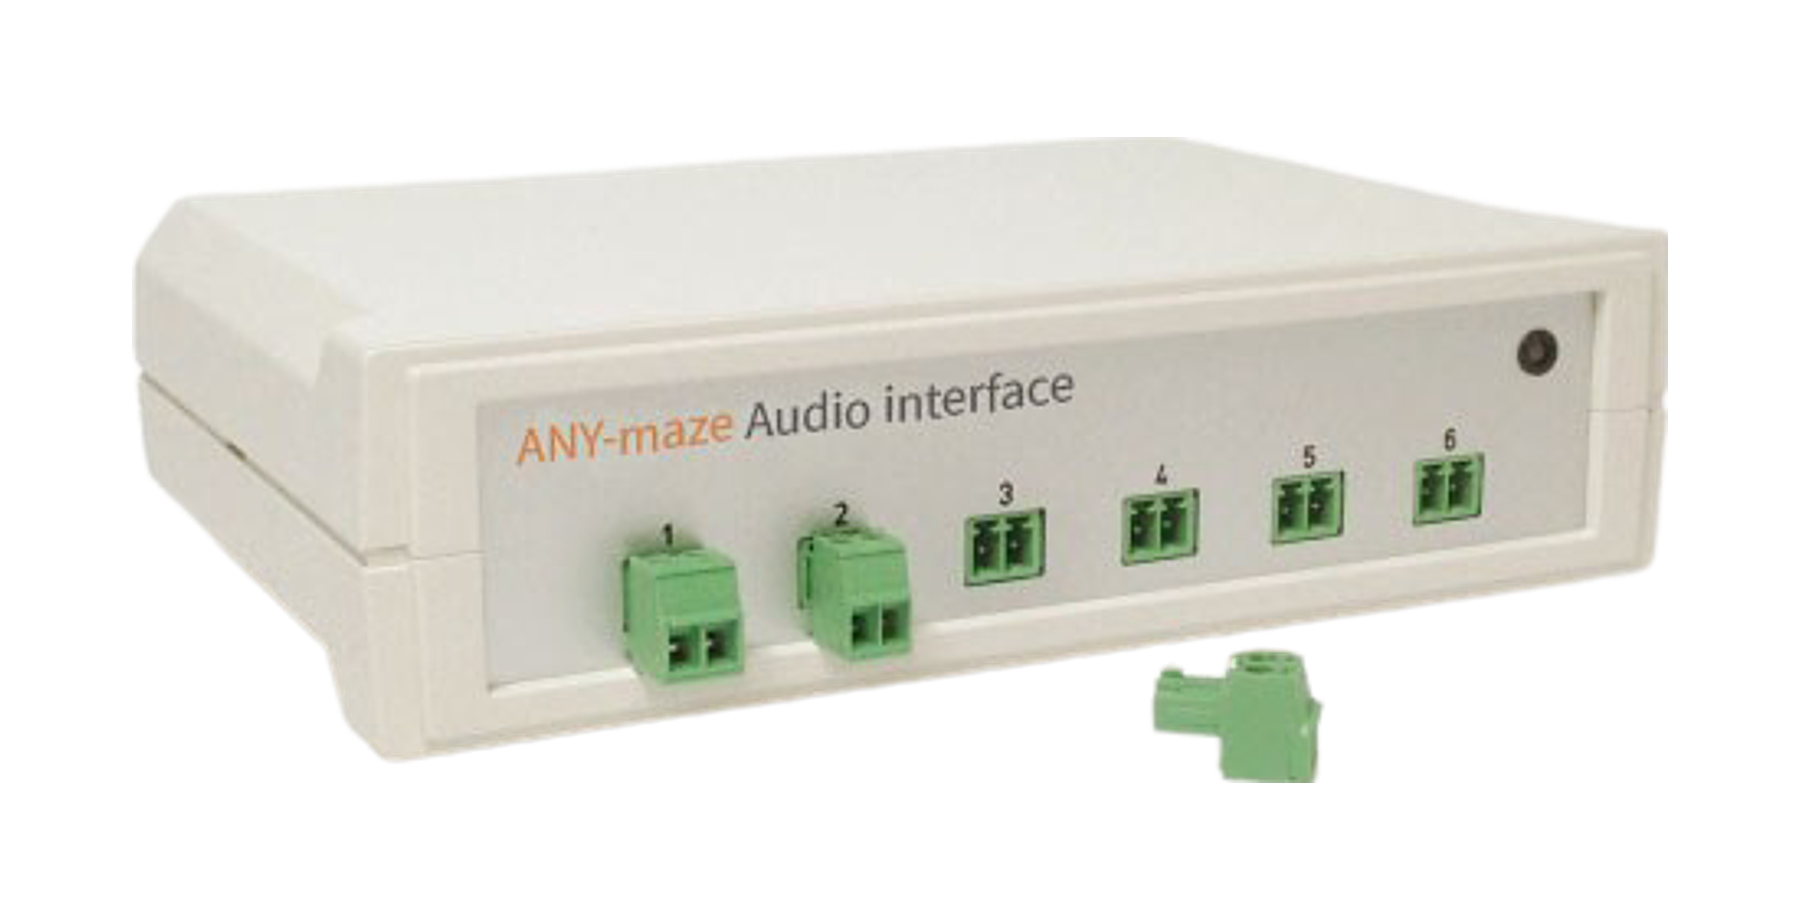 The ANY-maze Audio interface picture